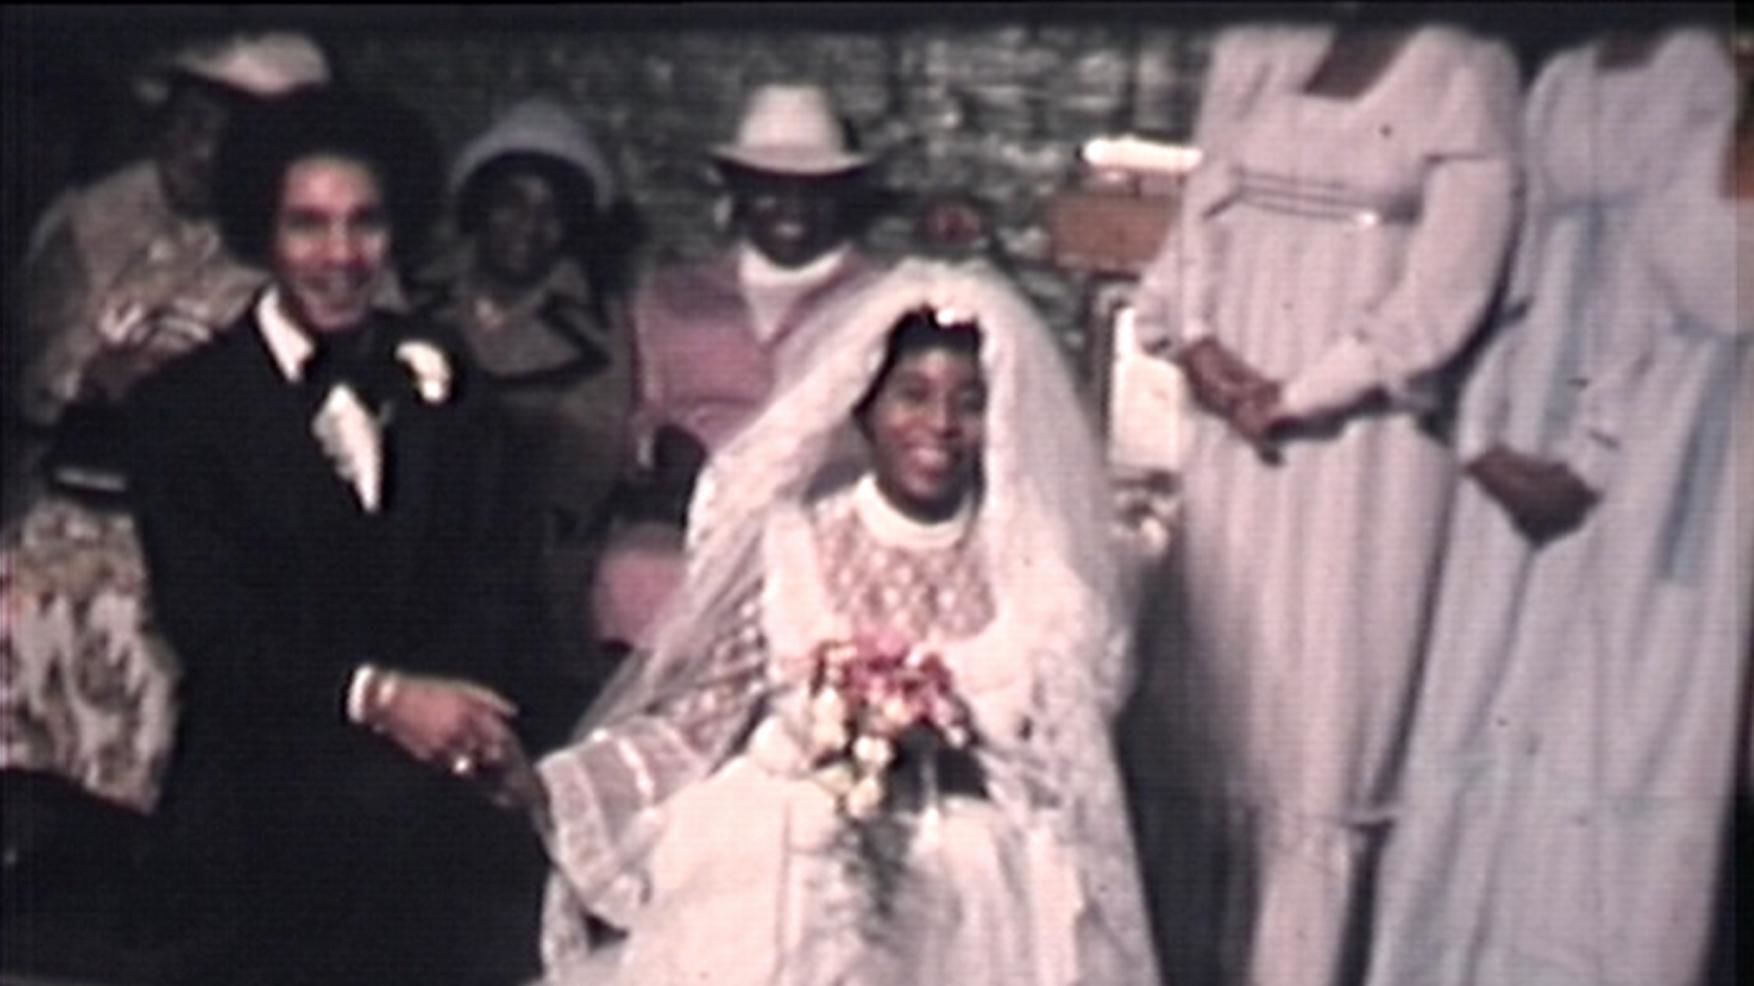 Still from a video recording of a wedding